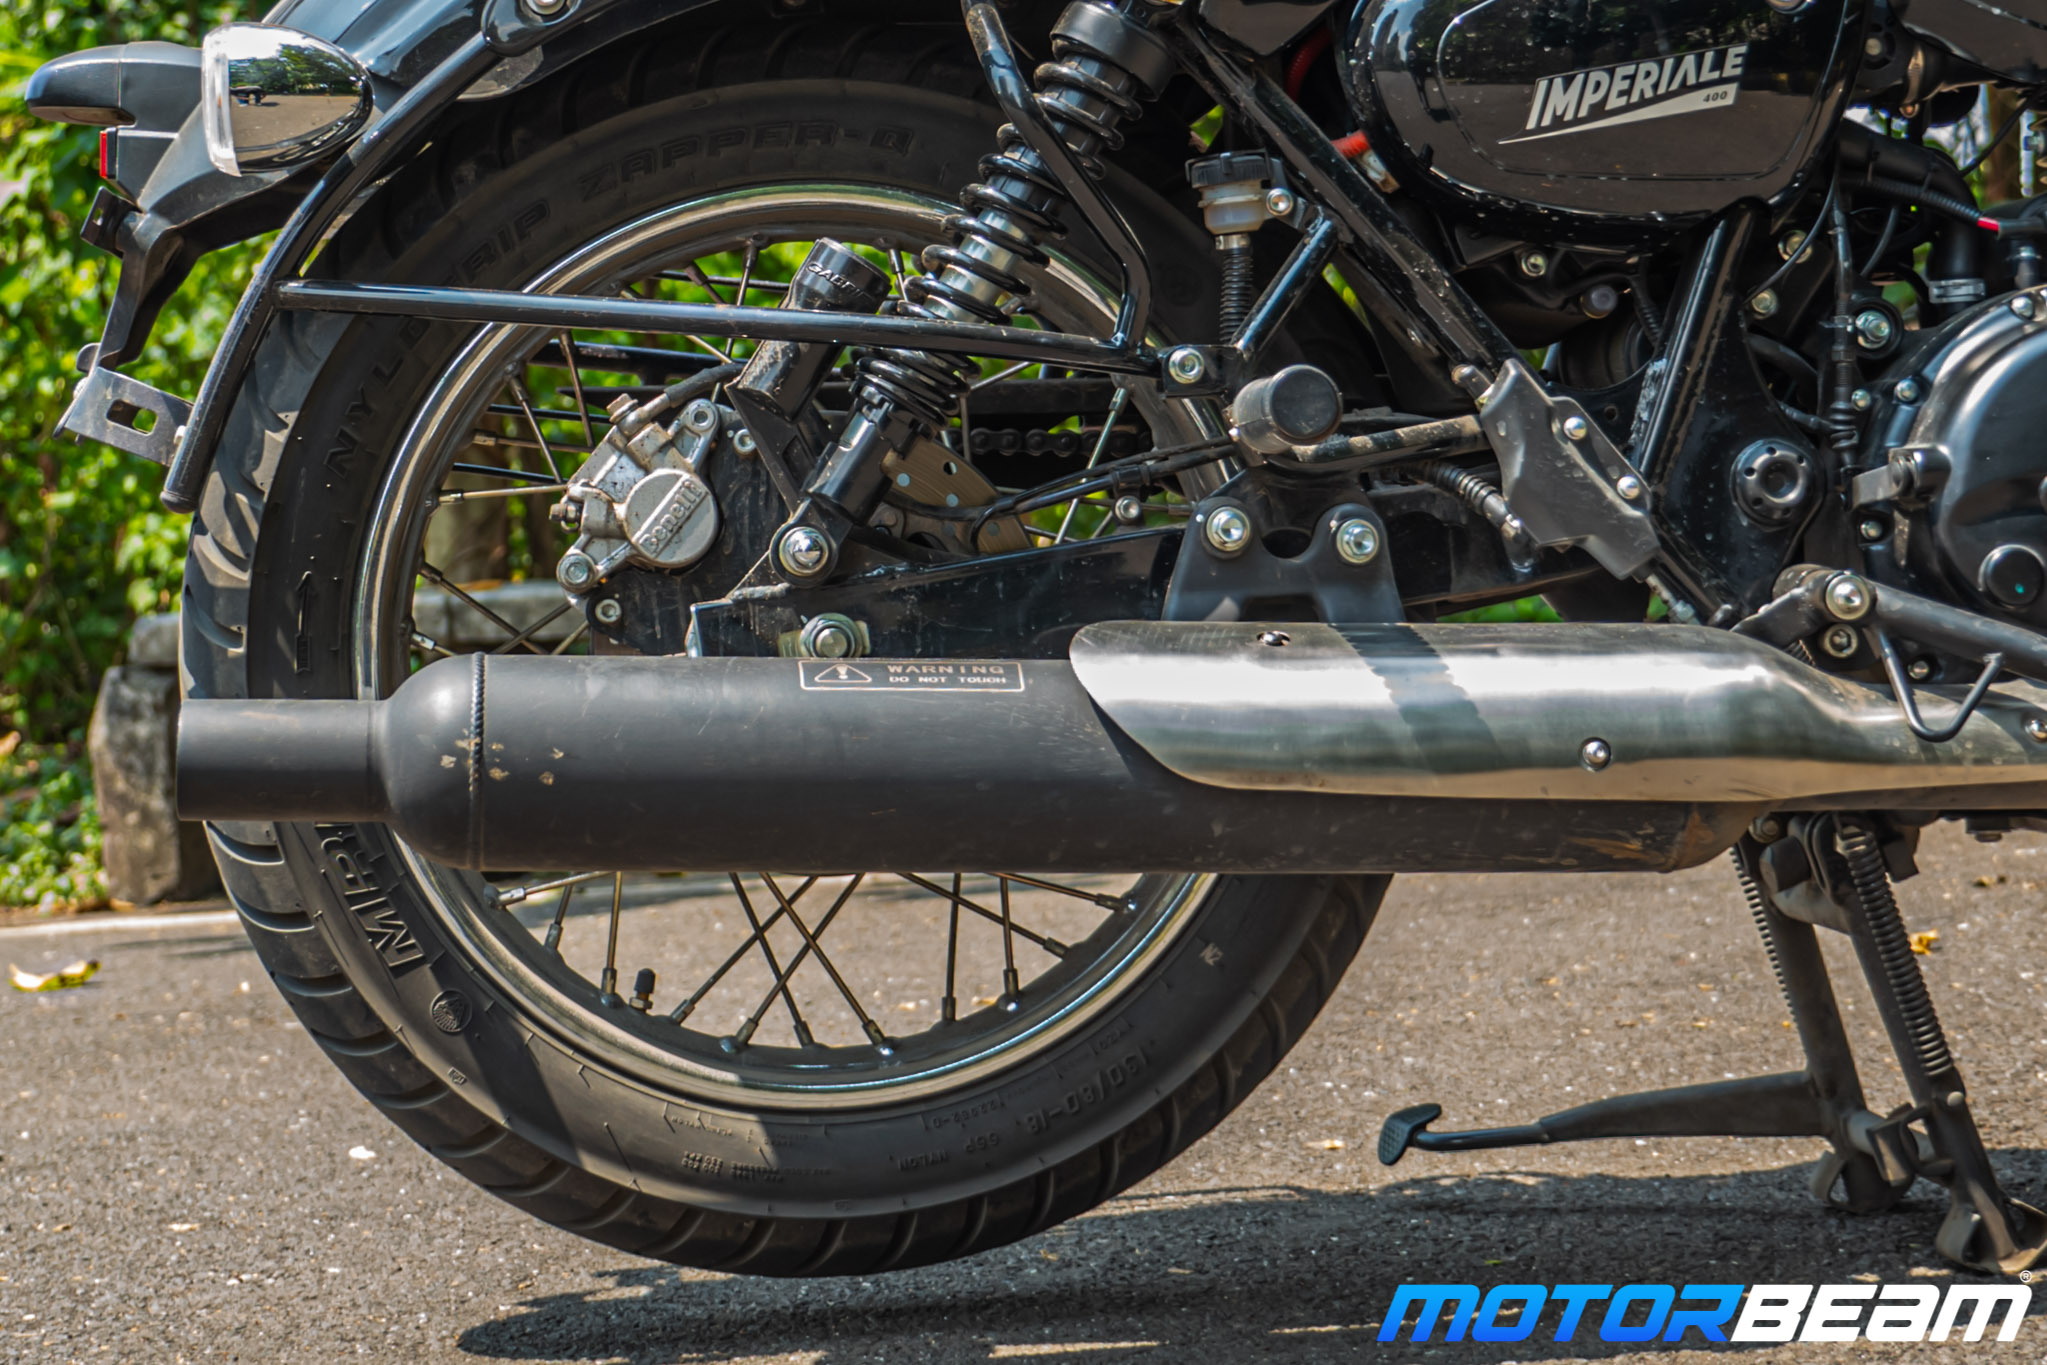 2020 Benelli Imperiale 400 Review 33